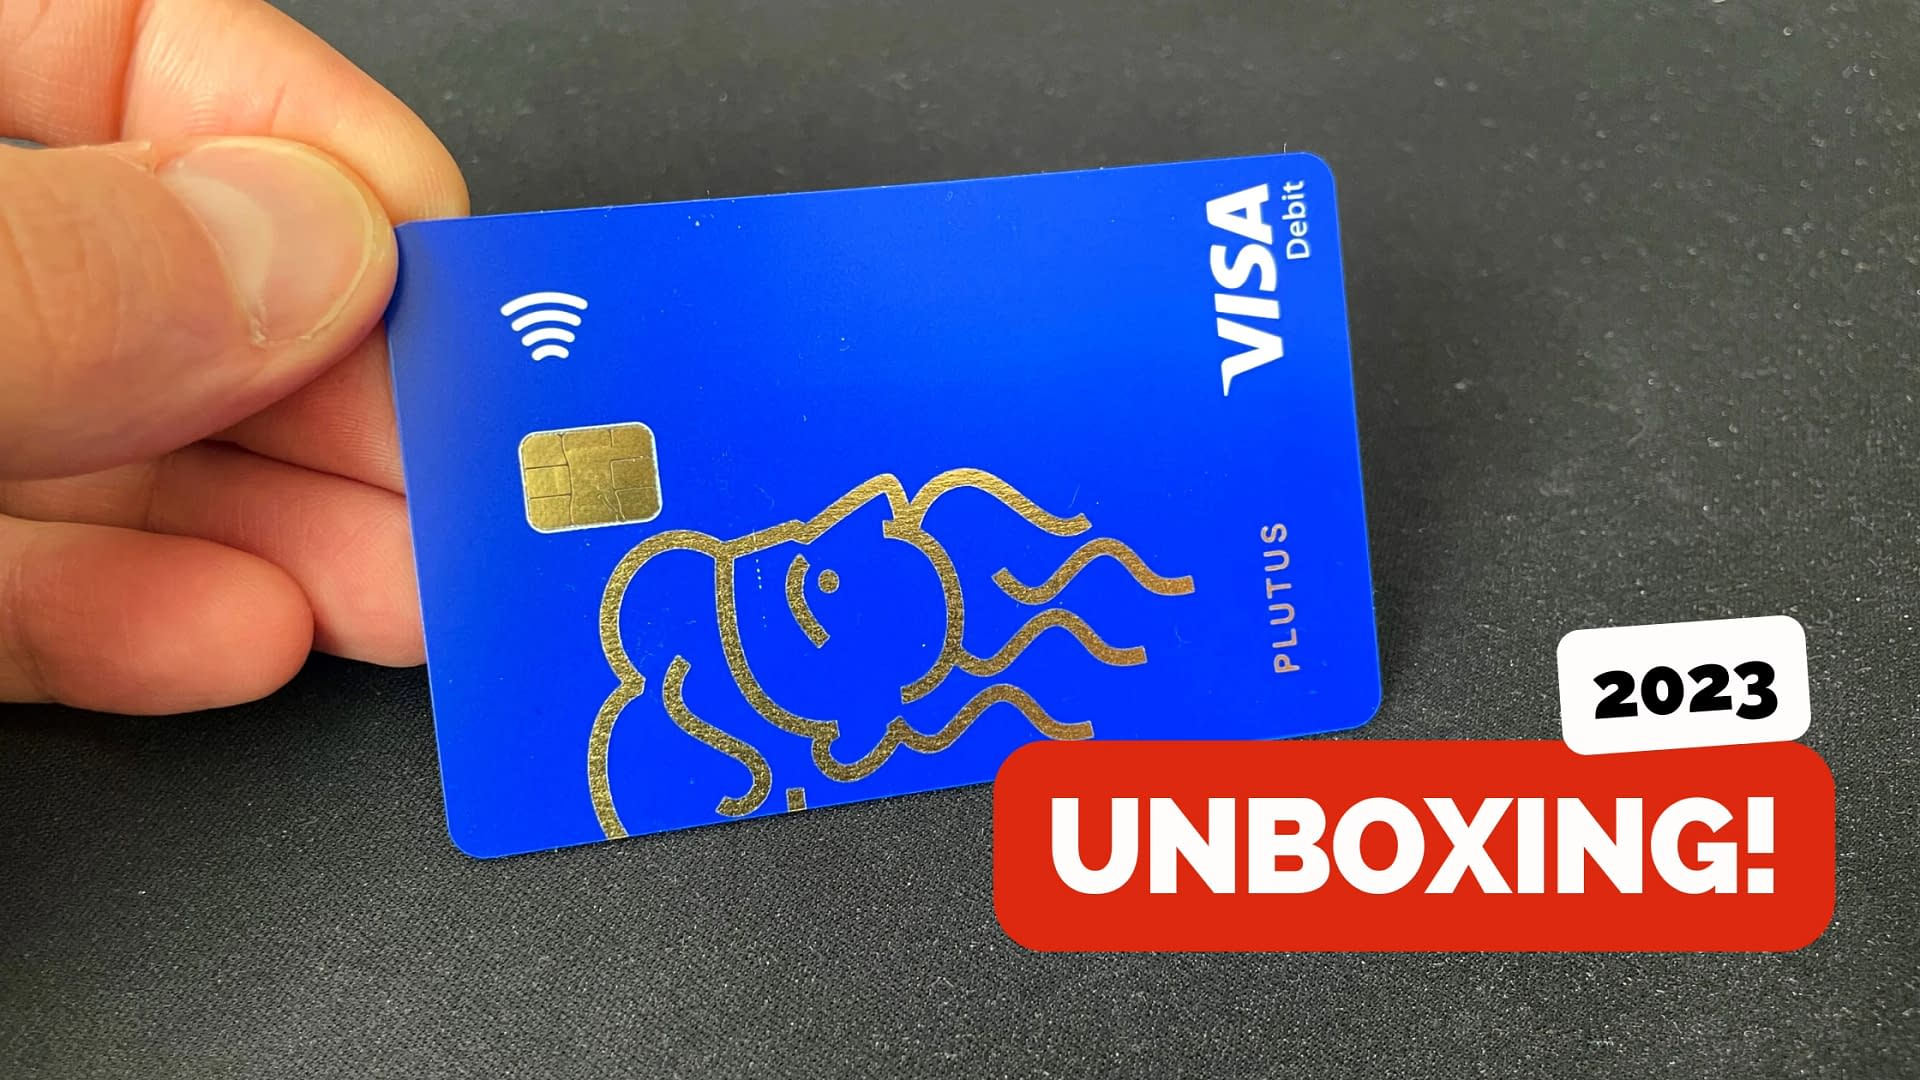 Plutus Card Unboxing (2023)